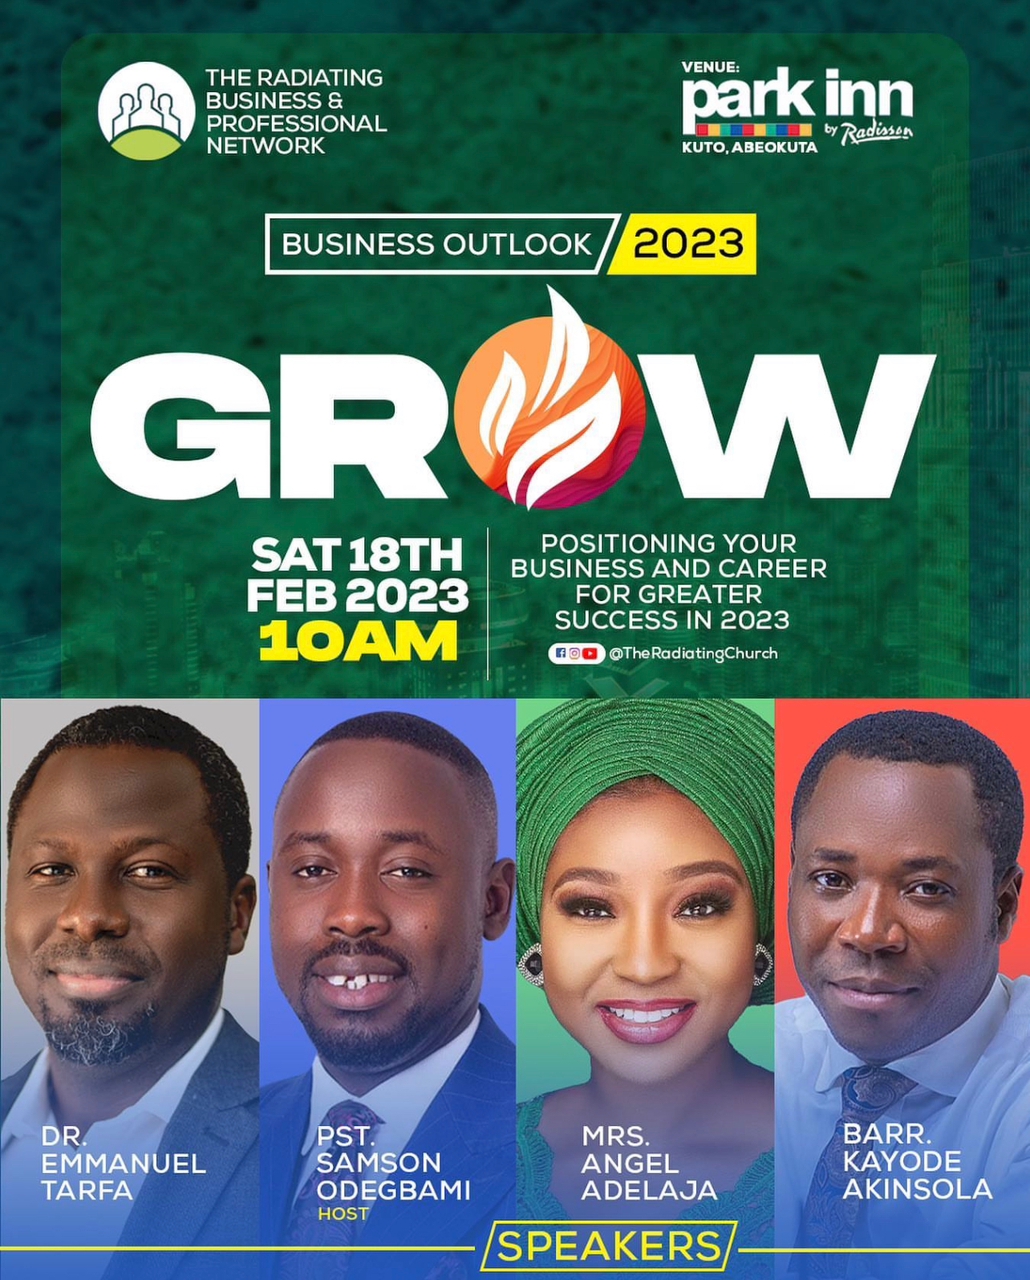 THE RADIATING CHURCH HOLDS ITS 2023 ANNUAL BUSINESS OUTLOOK The Radiating church has announced its annual business outlook which is scheduled to hold on Saturday 18th February, 2023 at 10am. This year conference is billed to hold at the Park inn by Radisson blue, Kuto at Abeokuta, Nigeria and it is themed ‘GROW’ The annual business outlook aims at developing the effectiveness of career attendees as well as sharing blue ocean strategies for young business owners. According to the statement issued by the Cosmopolitan Pastor of the church who is also the host of the business conference, this year conference promises to have an array of speakers like Dr. Emmanuel Tafa, Barr. kayode Akinsola, a business lawyer, Dr. Angel Adelaja, a senior special assistant to the governor on agriculture among other speakers which are drawn from various sectors of the economy.